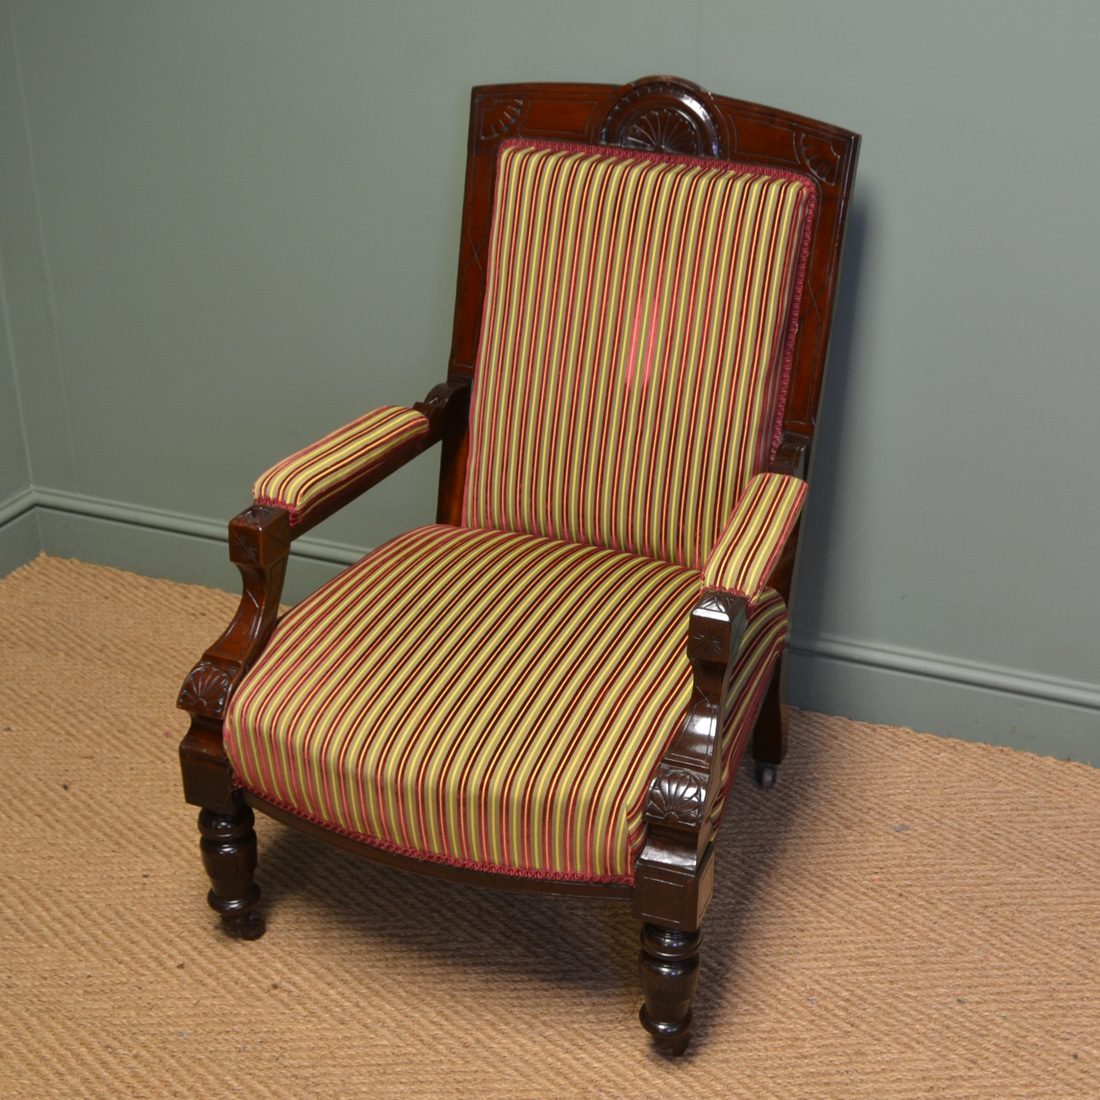 Sitting pretty: the history and restoration of antique chairs